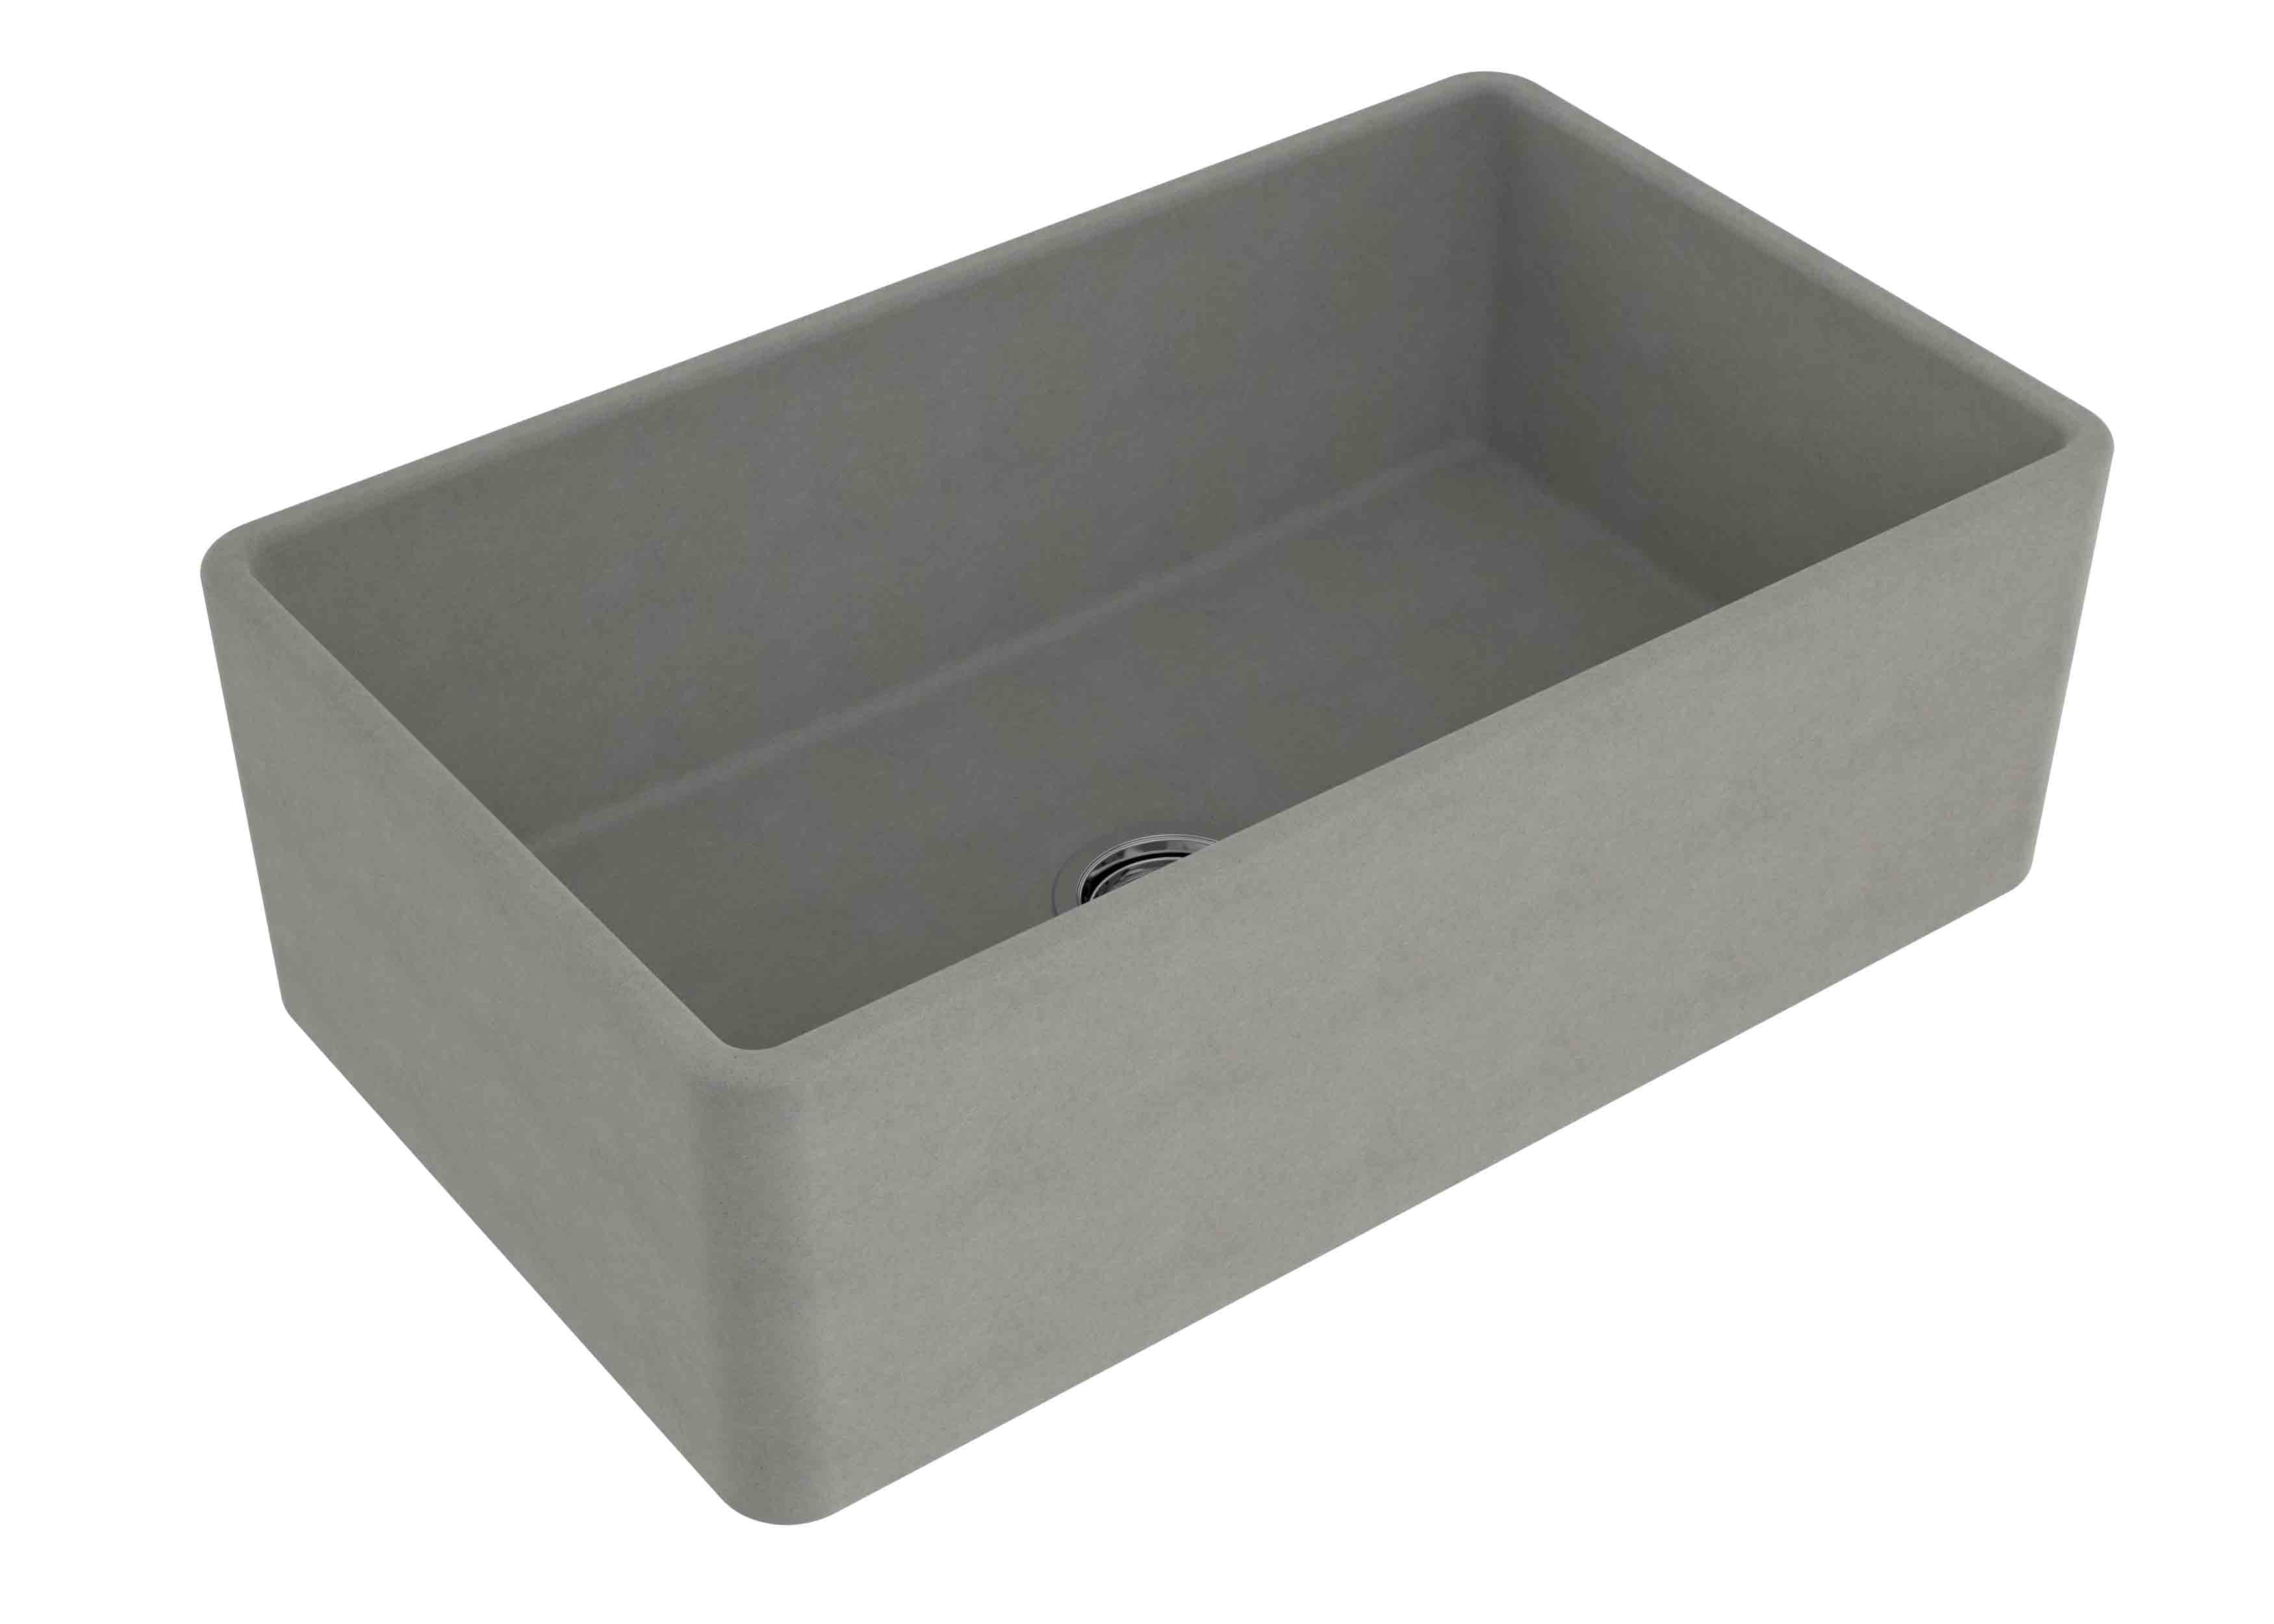 TURNER HASTINGS NOVI FARMHOUSE BUTLER SINK WITH OVERFLOW CONCRETE LOOK 765MM